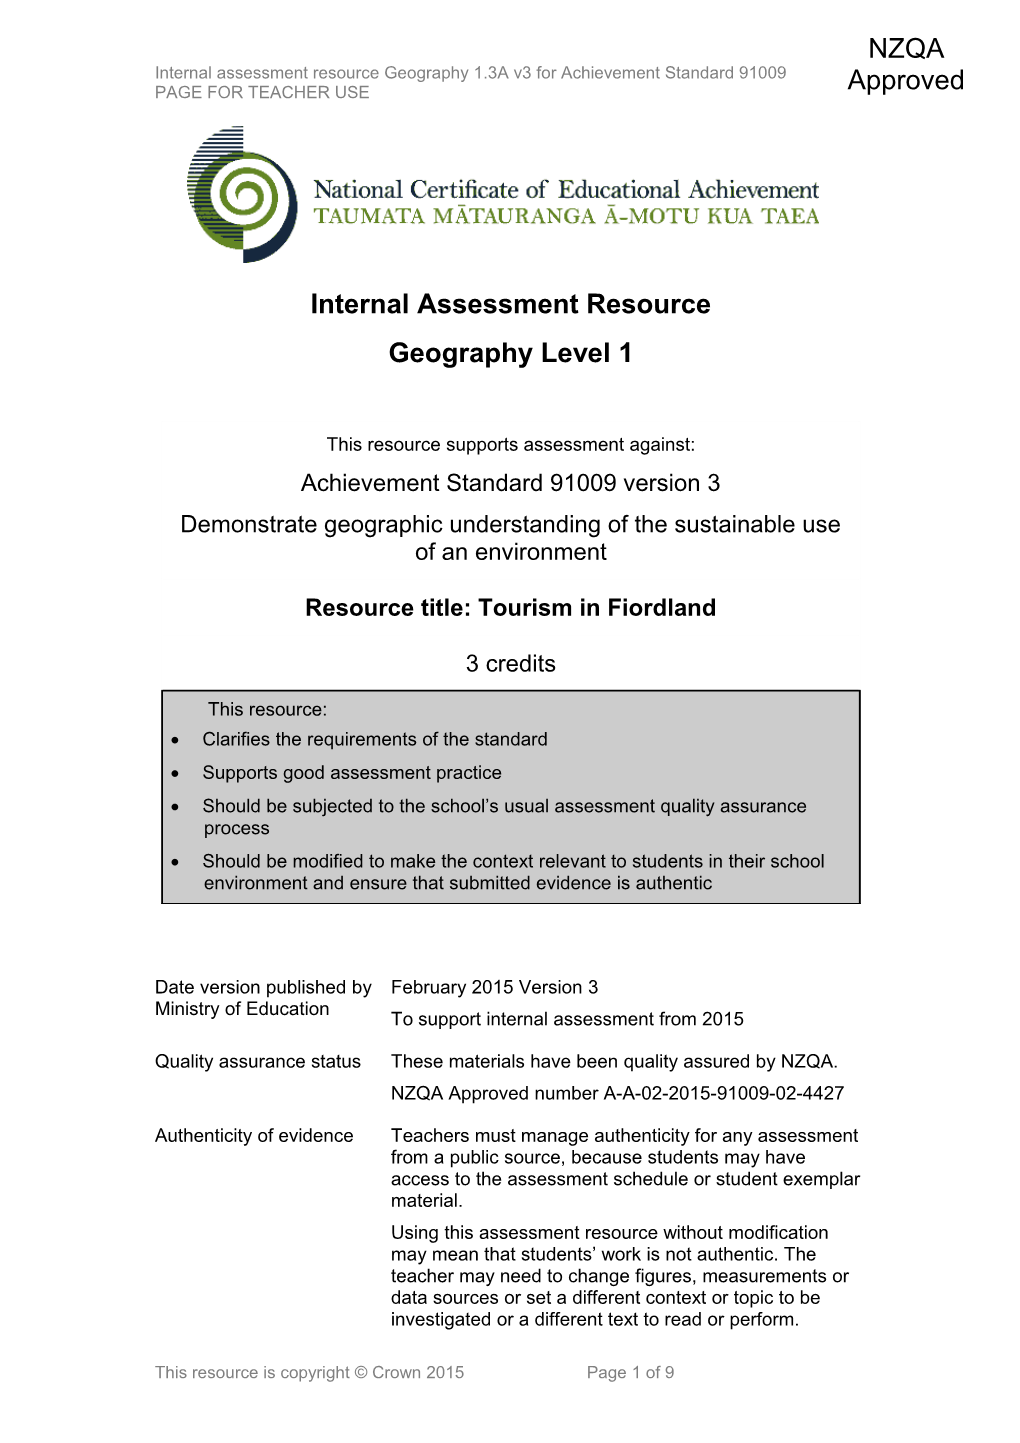 Level 1 Geography Internal Assessment Resource